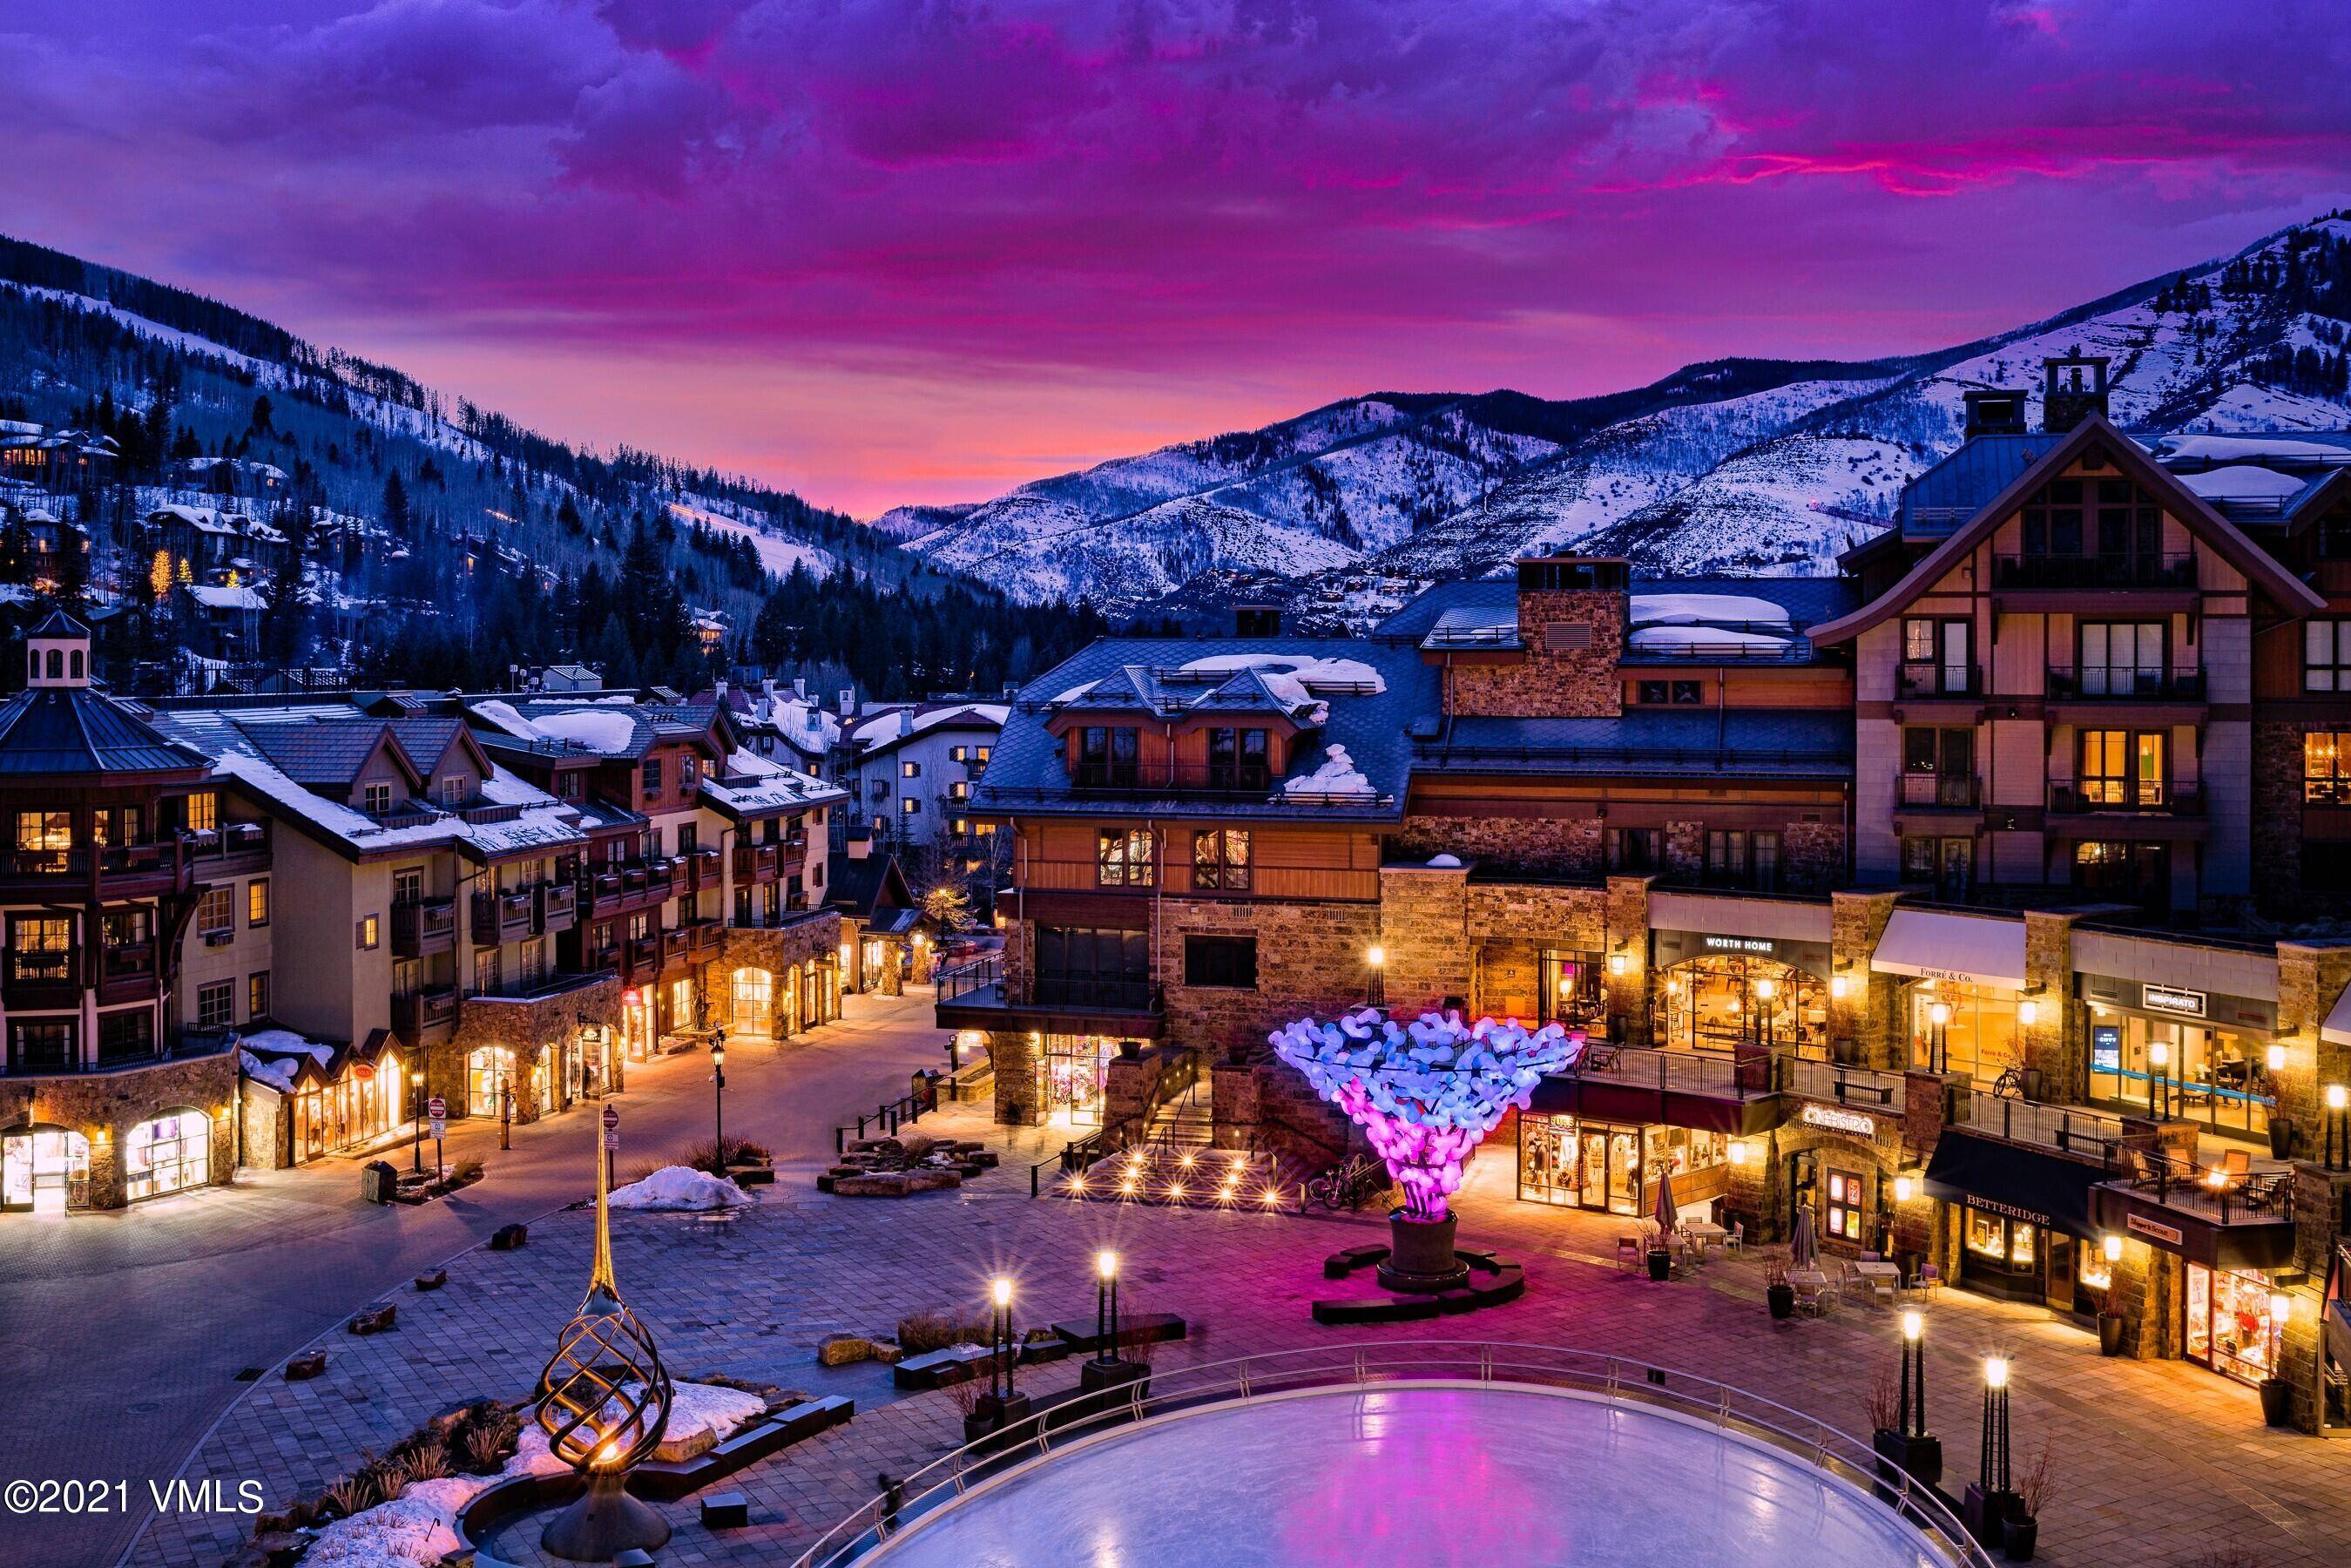 Enjoy Vail in style with this luxury, open concept residence in the heart of Vail Village.